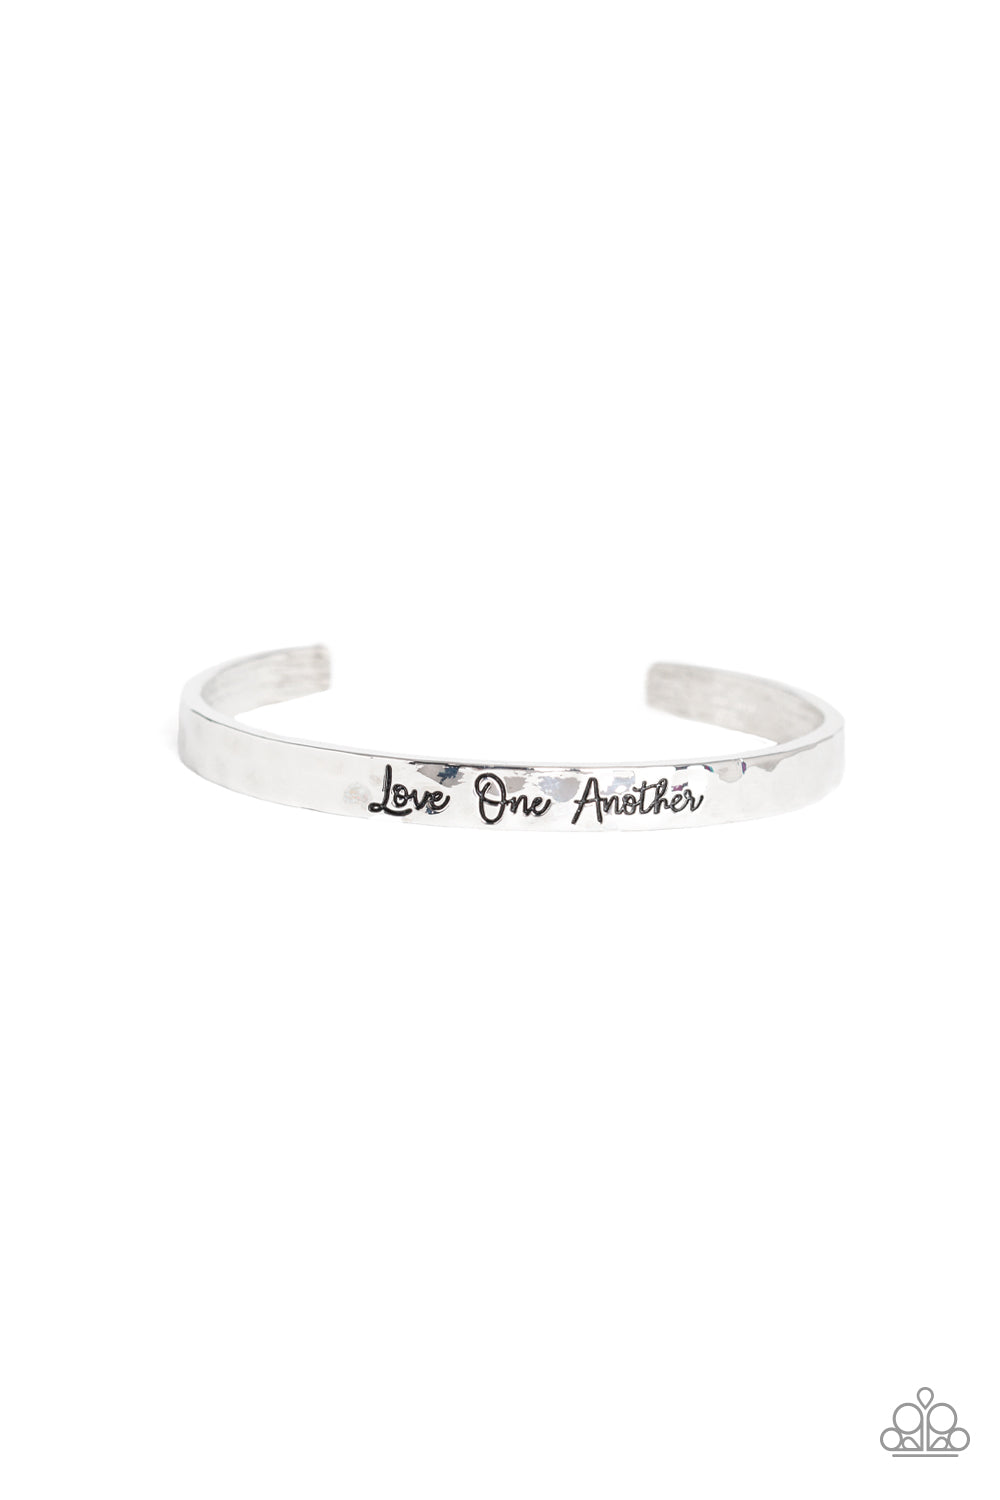 LOVE ONE ANOTHER - SILVER BRACELET